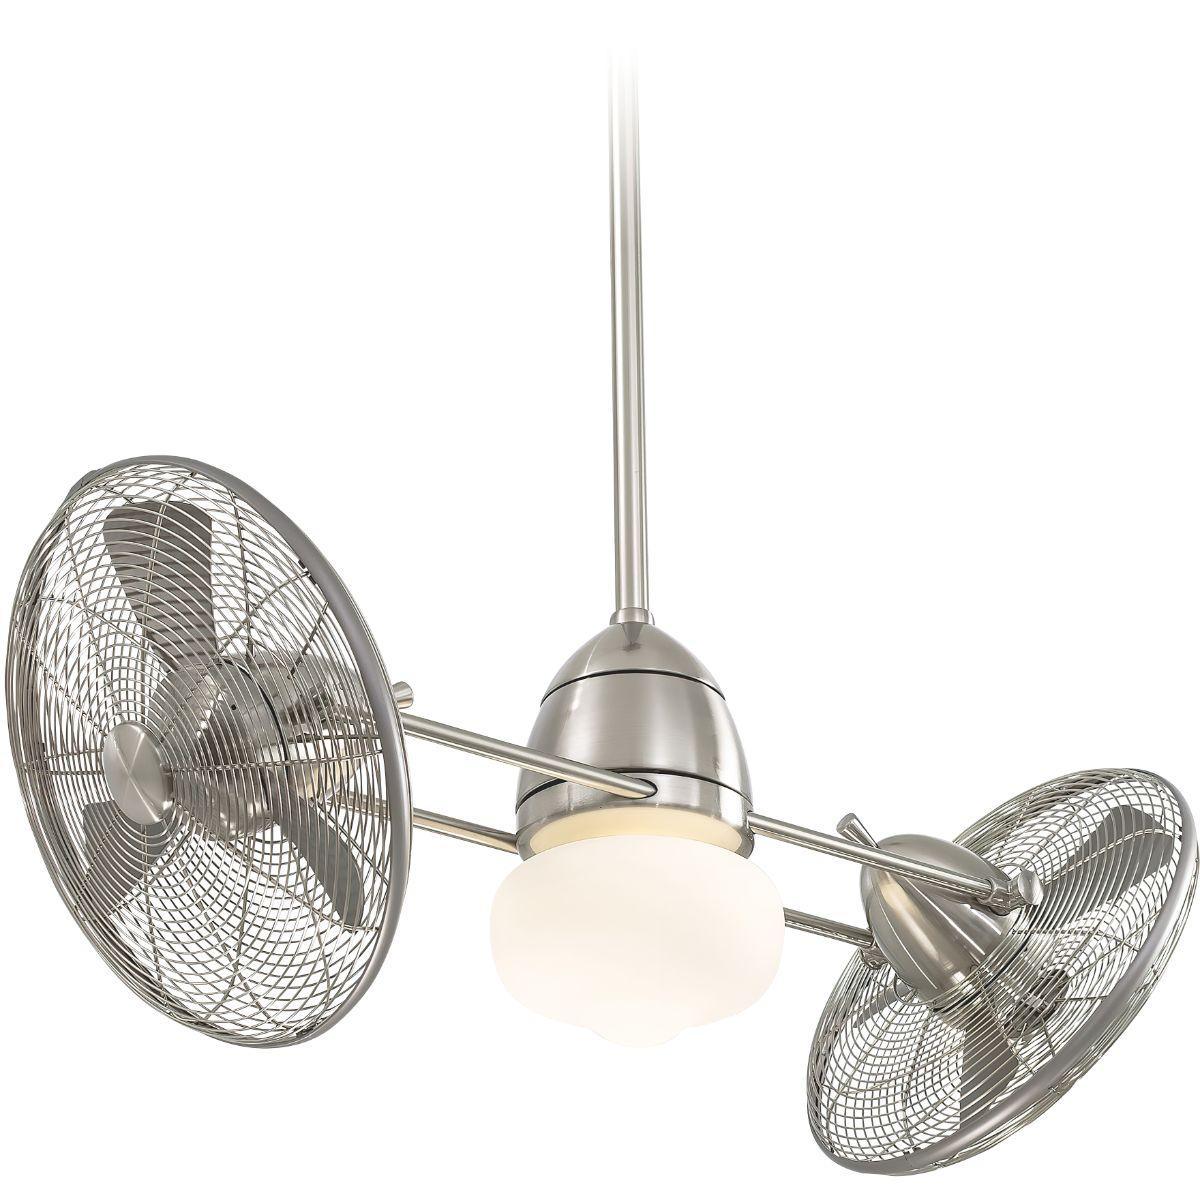 Gyro 42 Inch Contemporary Dual Outdoor Ceiling Fan With Light, Wall Control Included - Bees Lighting